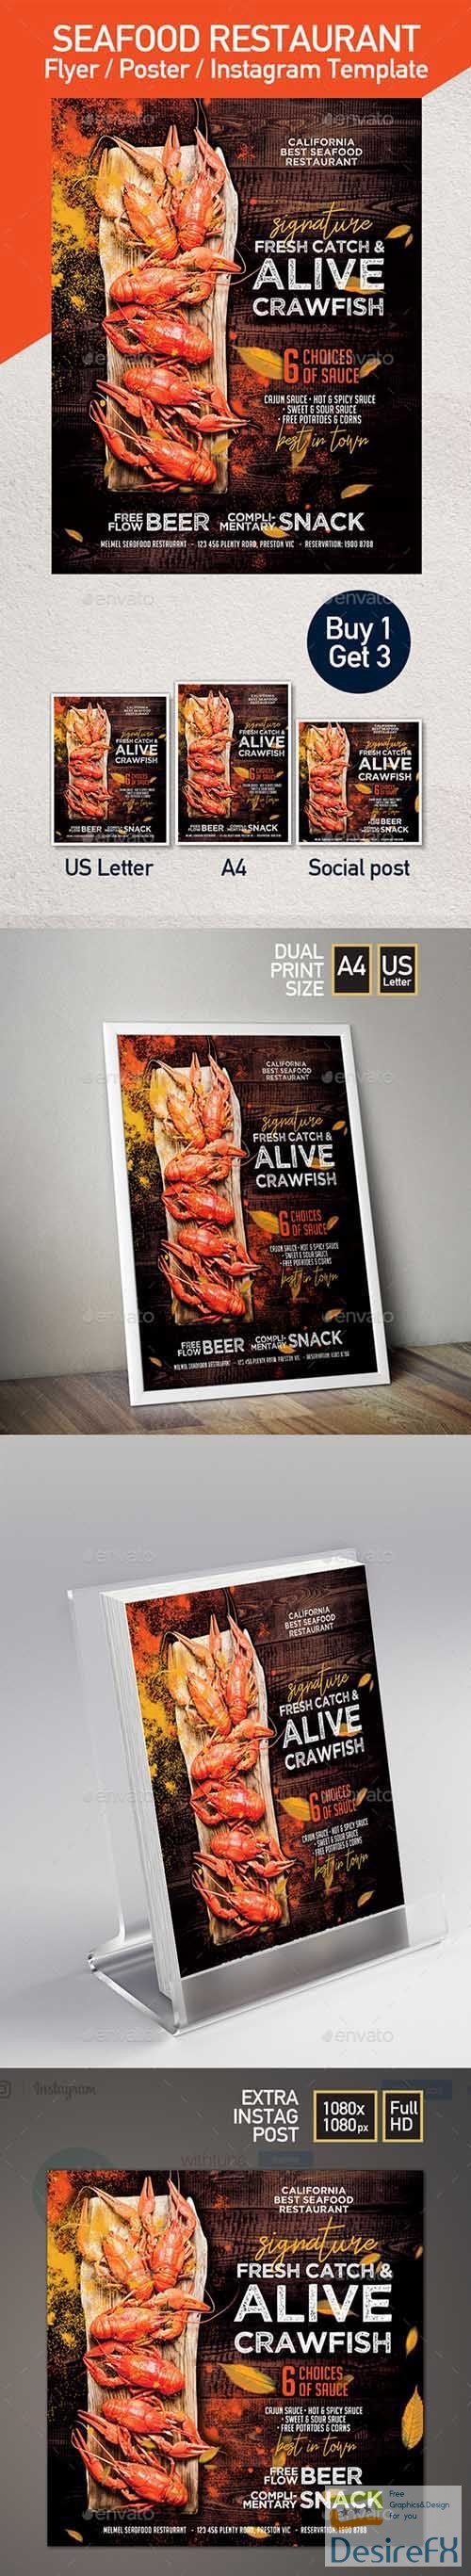 Crawfish Template for Flyer or Poster 22314489